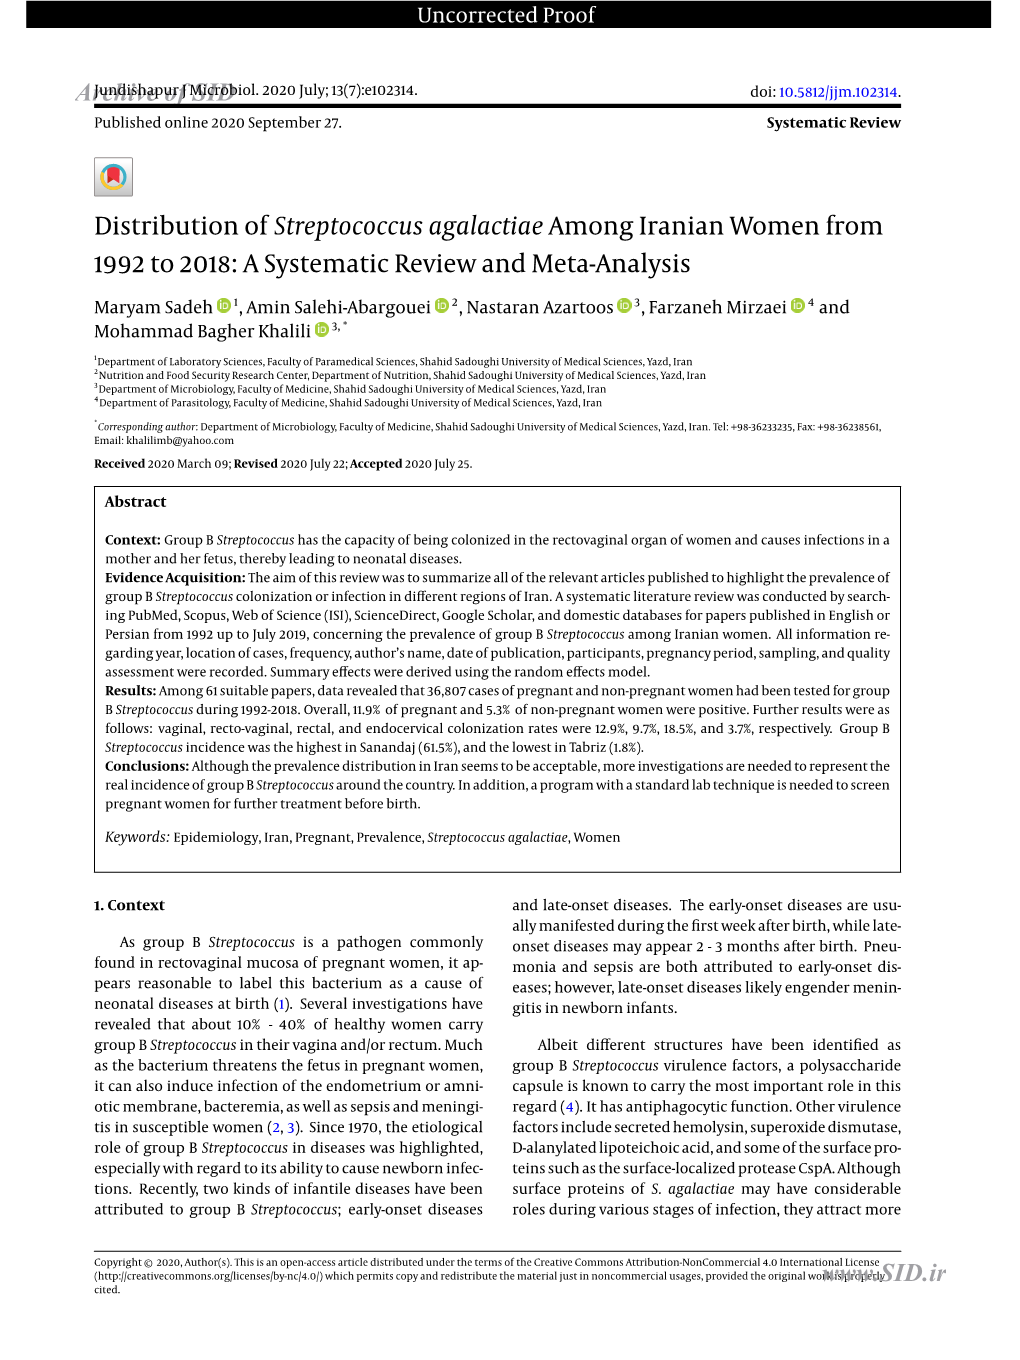 Streptococcus Agalactiae Among Iranian Women from 1992 to 2018: a Systematic Review and Meta-Analysis